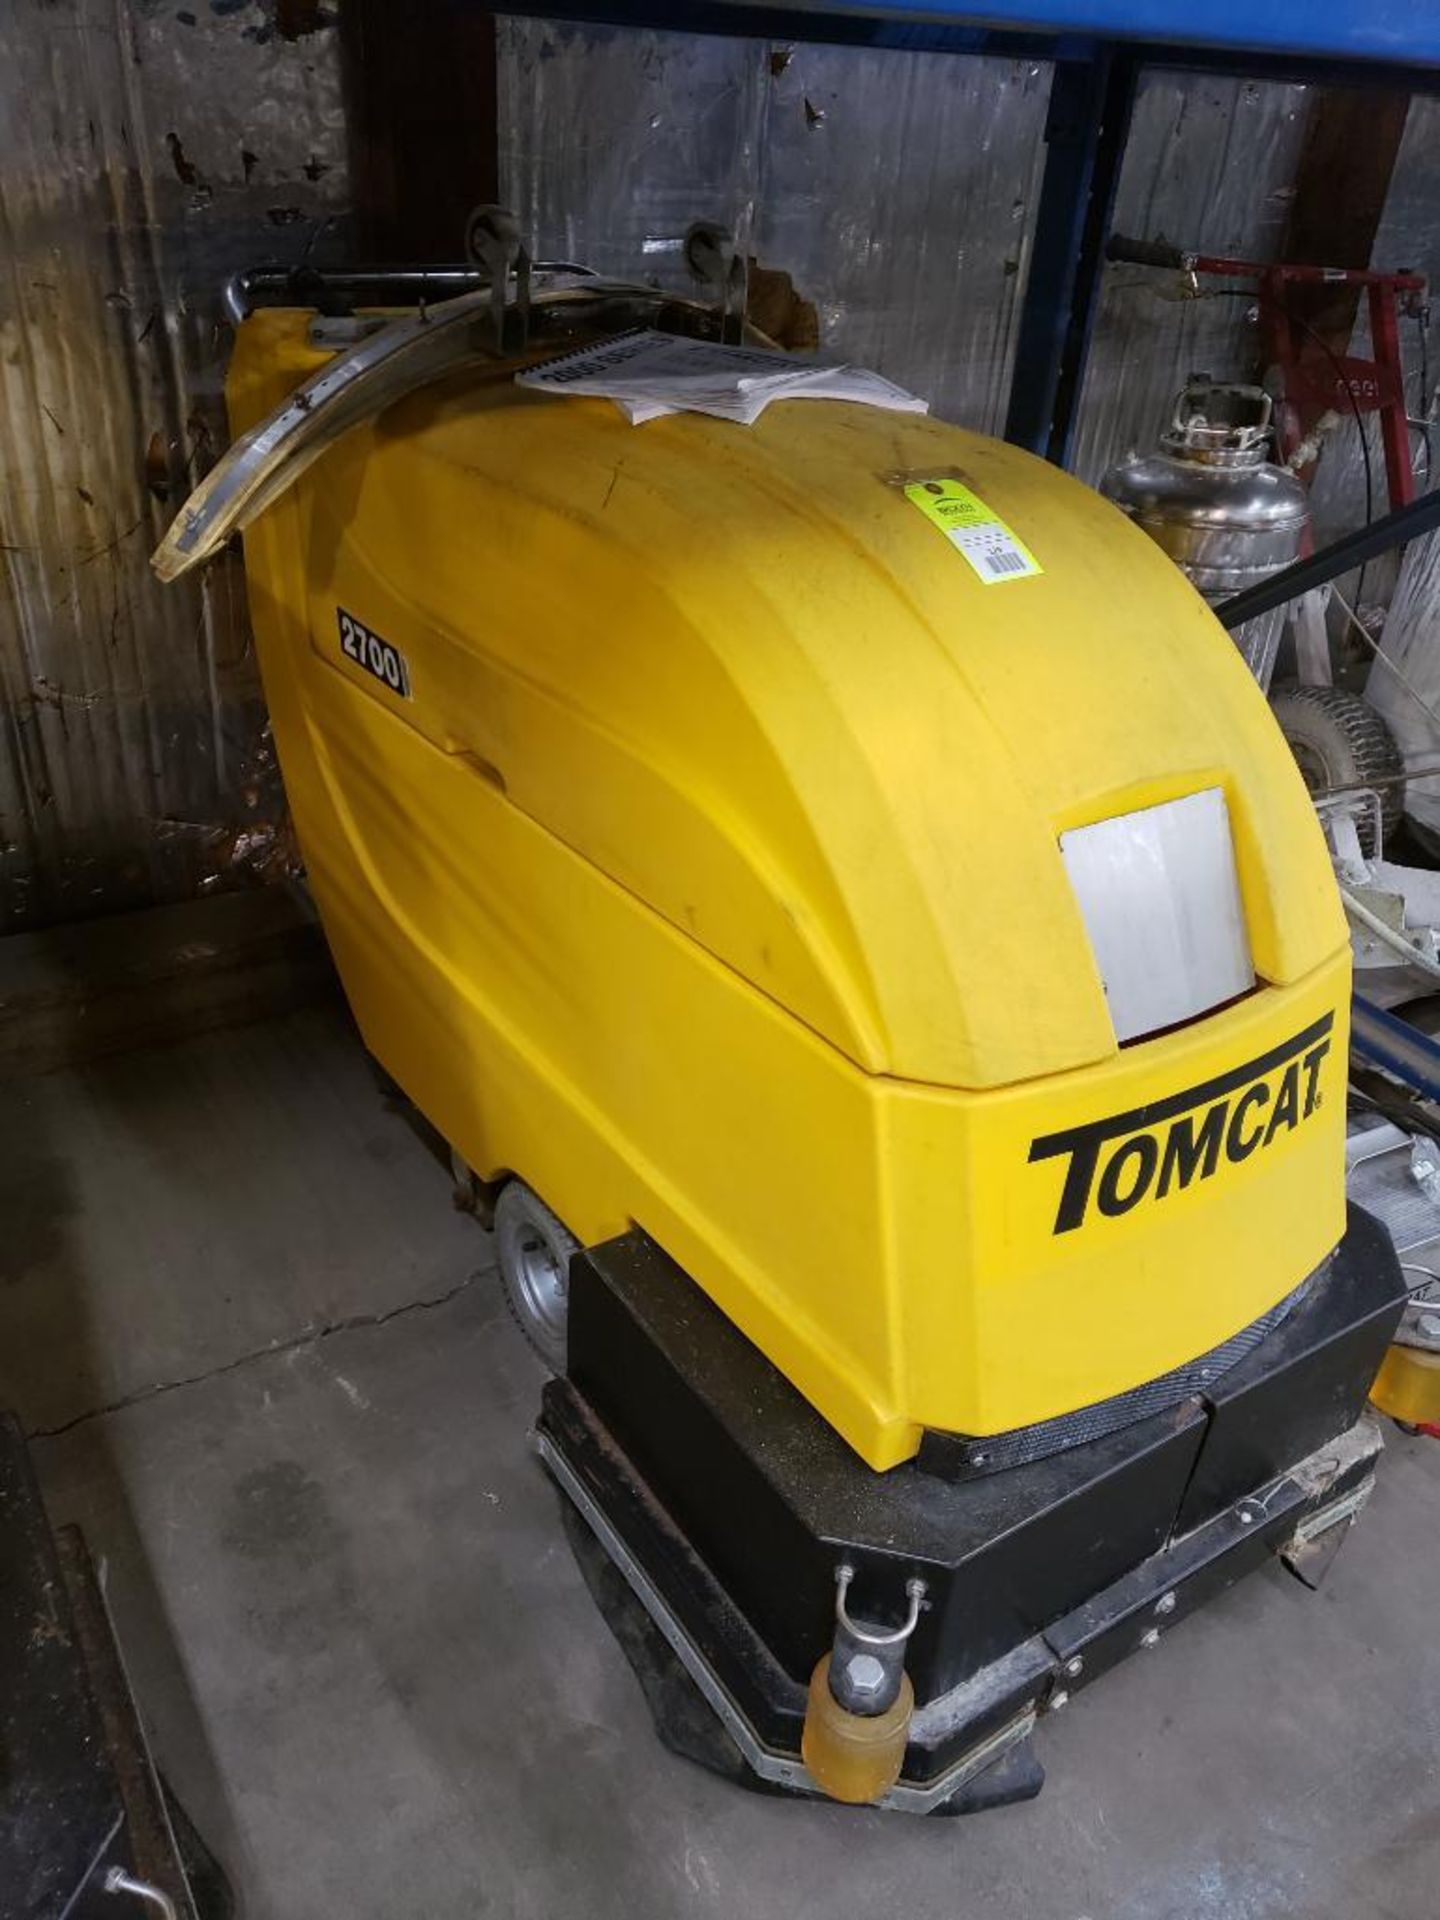 Tomcat 2700 industrial floor scrubber includes charger. - Image 2 of 5